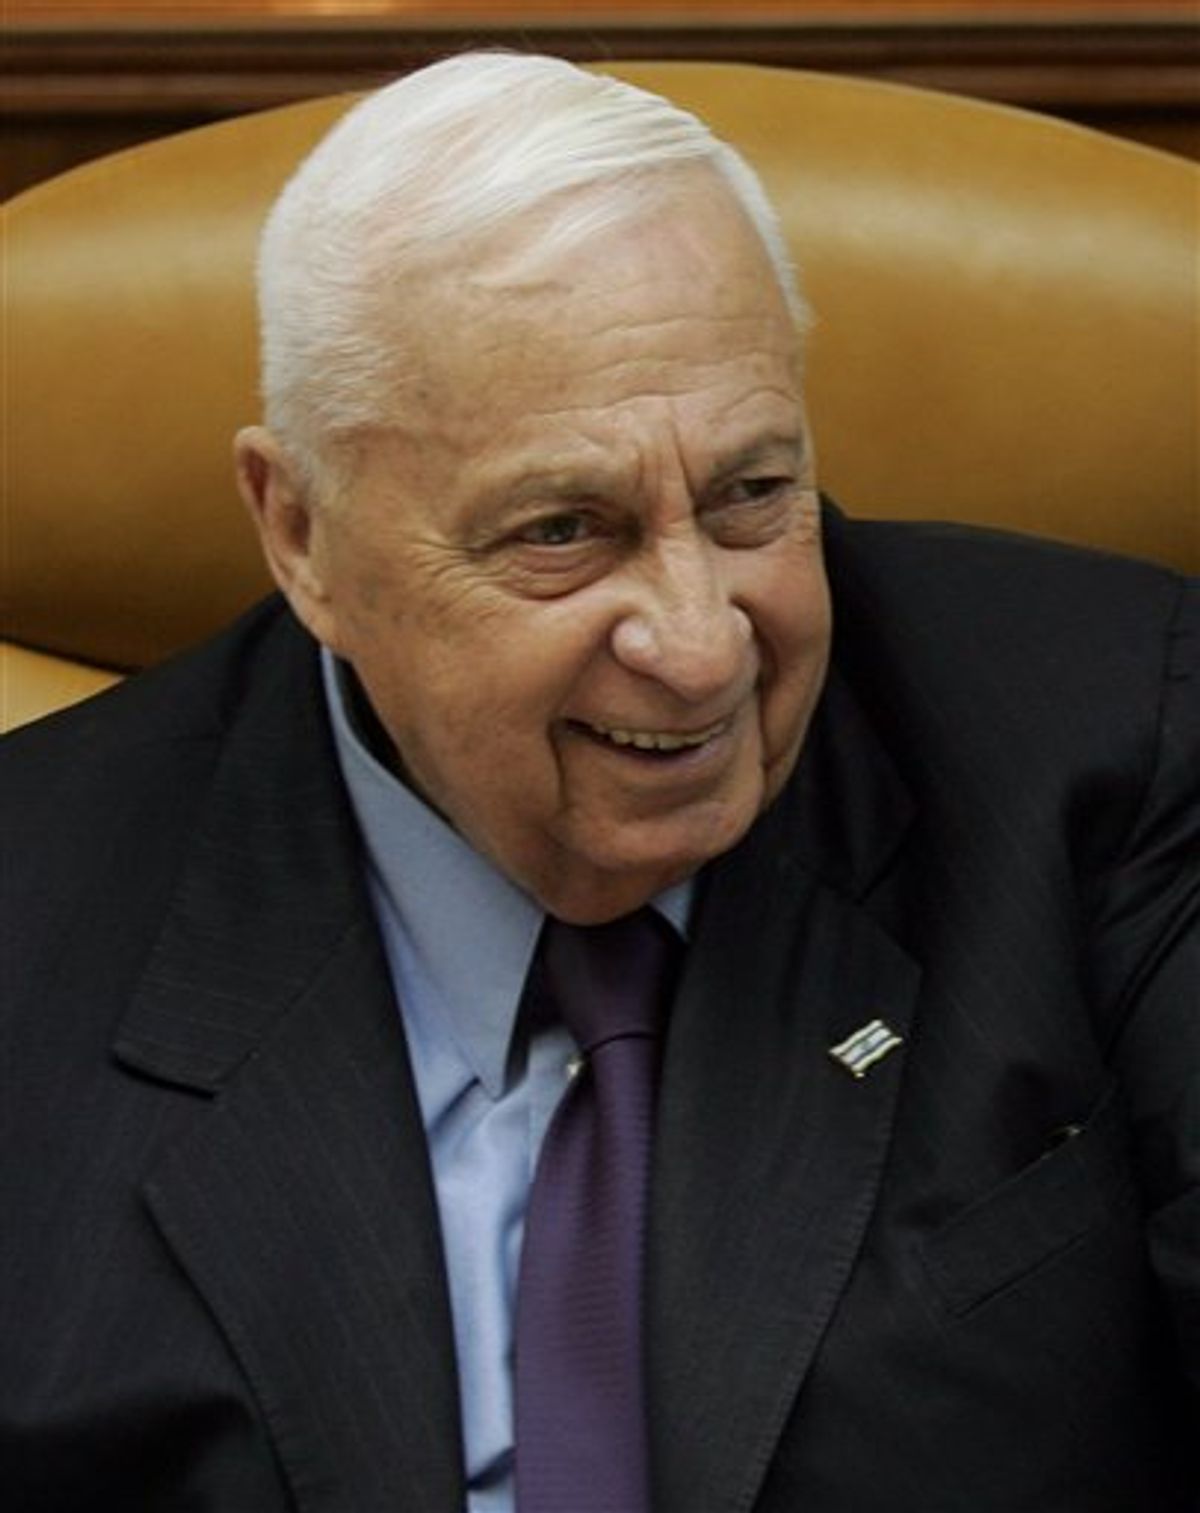 FILE - In This file photo taken Sunday Dec. 18, 2005, Israeli Prime Minister Ariel Sharon smiles as he talks to journalists prior to the weekly cabinet meeting in Jerusalem. Sharon's former aide said on Thursday, Nov. 11, 2010, that the comatose ex-Israeli premier will be moved to his ranch in Israel's south.  Sharon, one of Israel's most popular and controversial figures, has been in the long-term care unit of Tel Hashomer Hospital outside Tel Aviv since suffering a series of strokes in 2006. (AP Photo/ Emilio Morenatti, File) (AP)